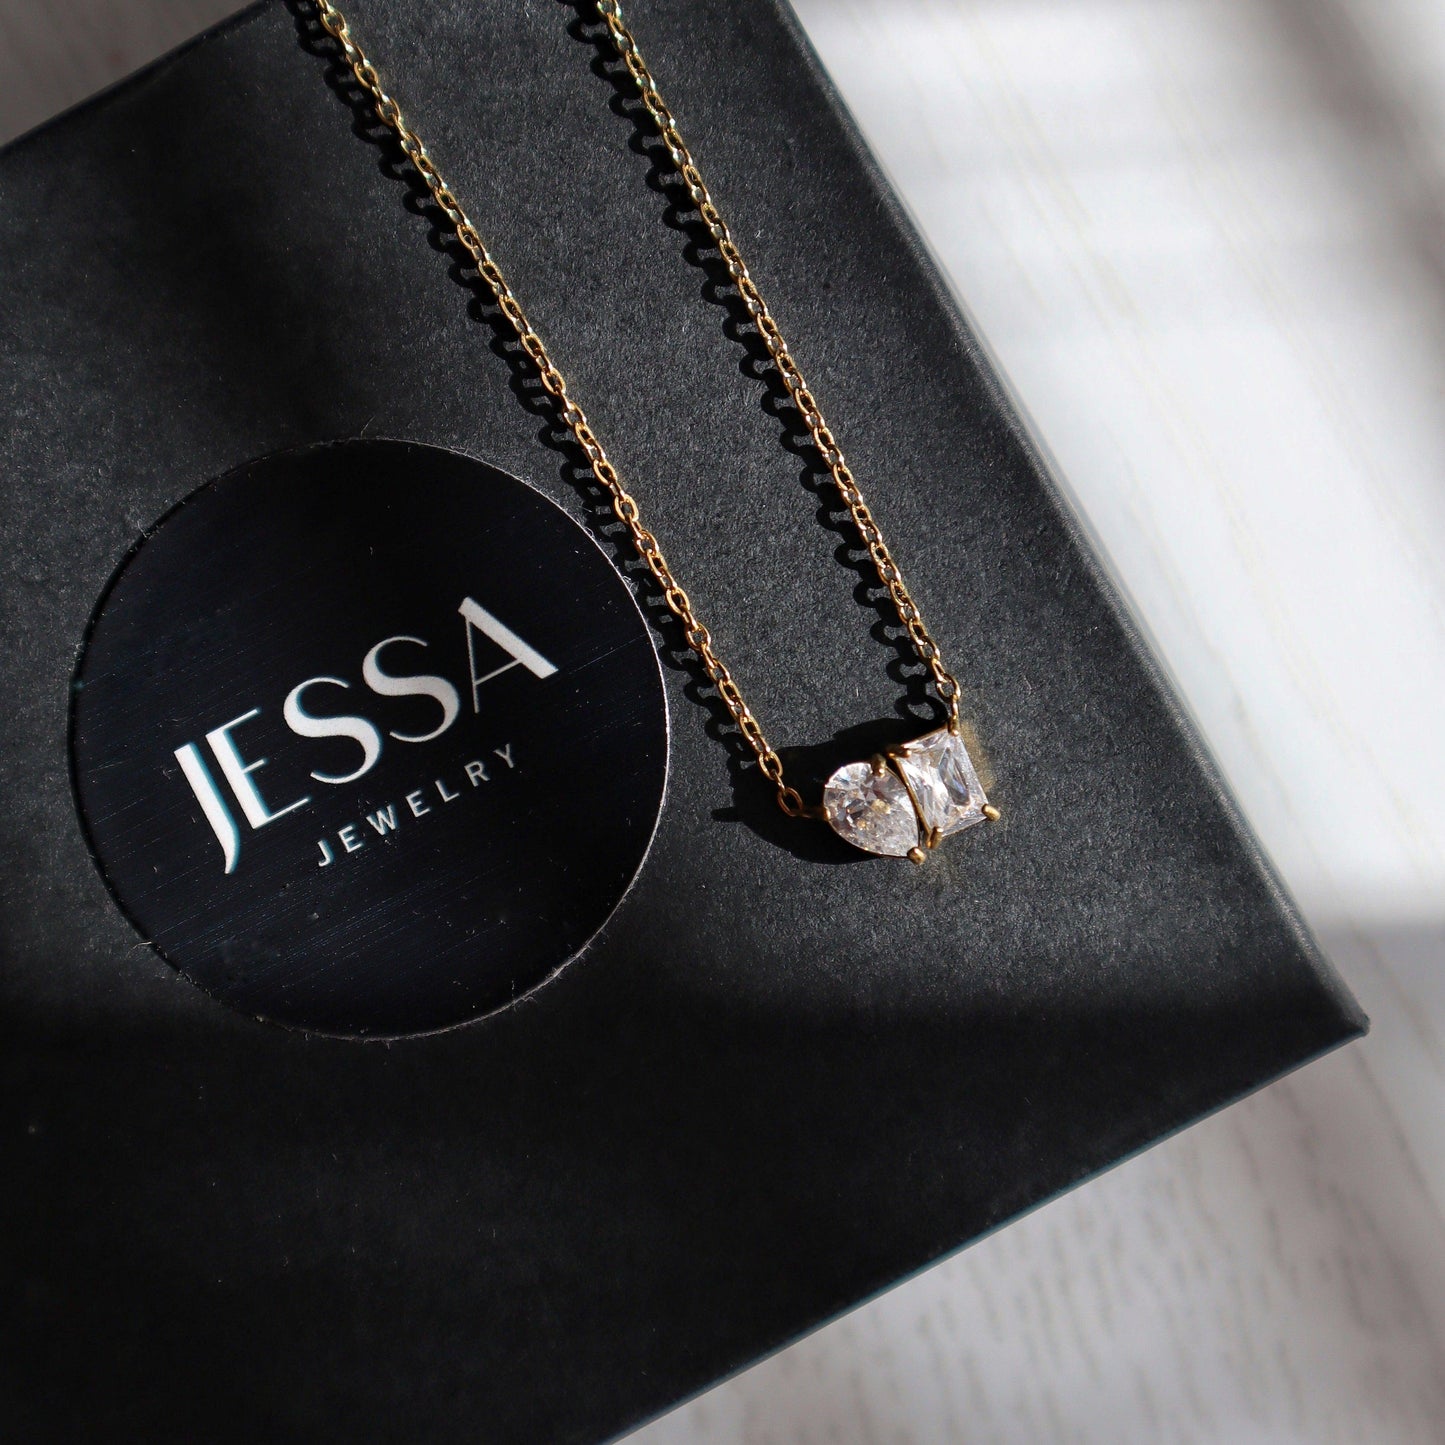 Dainty Toi et Moi Necklace | Pendant Necklace - JESSA JEWELRY | GOLD JEWELRY; dainty, affordable gold everyday jewelry. Tarnish free, water-resistant, hypoallergenic. Jewelry for everyday wear